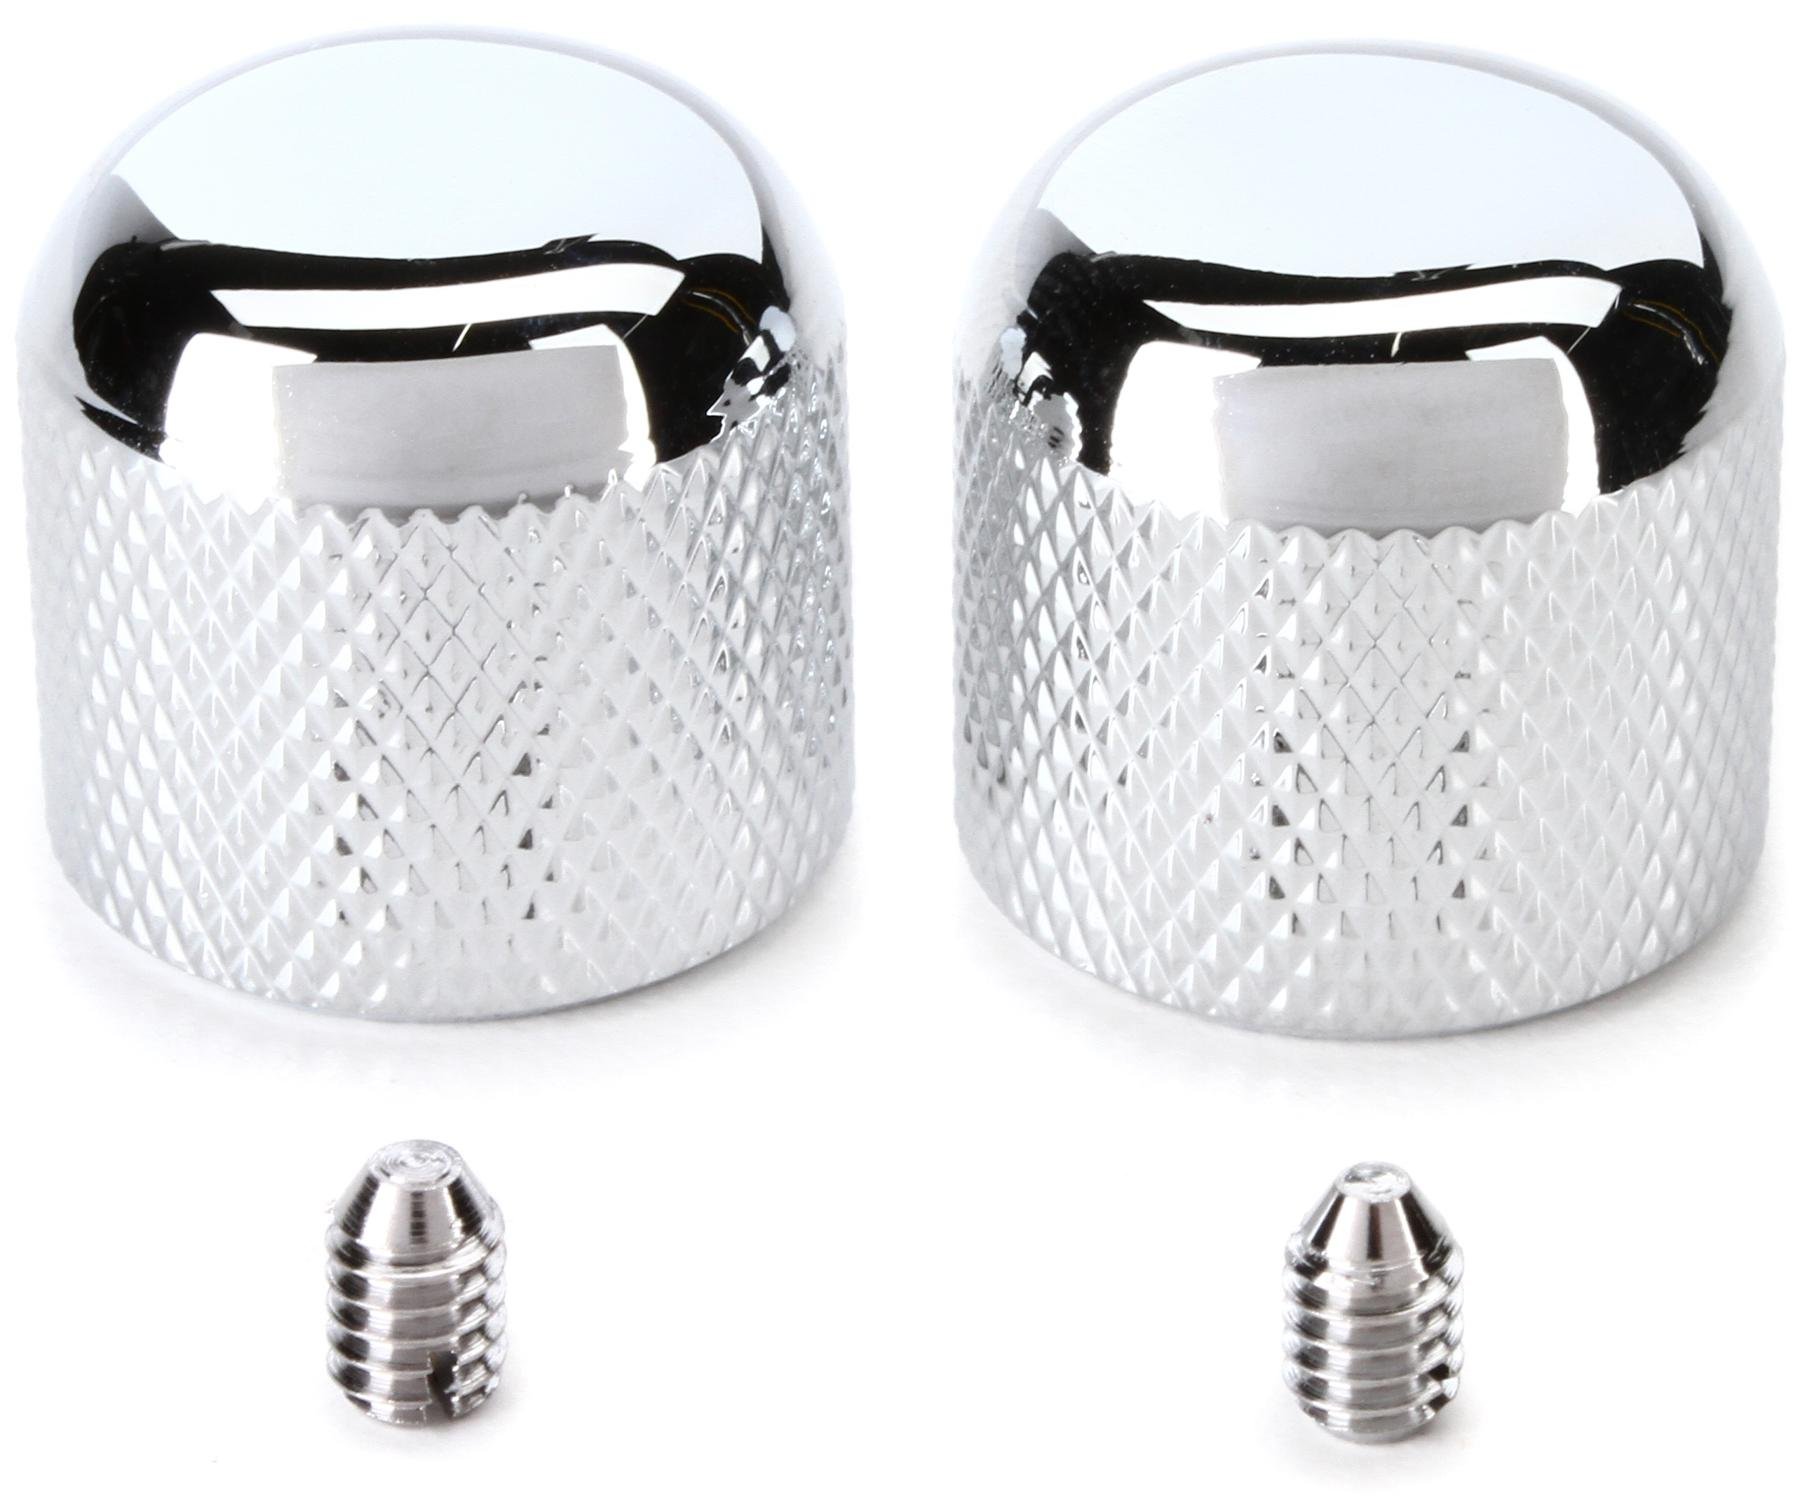 Chrome Barrel Knobs Flat Top for P Bass/Telecaster Domed Knurled Volume Tone